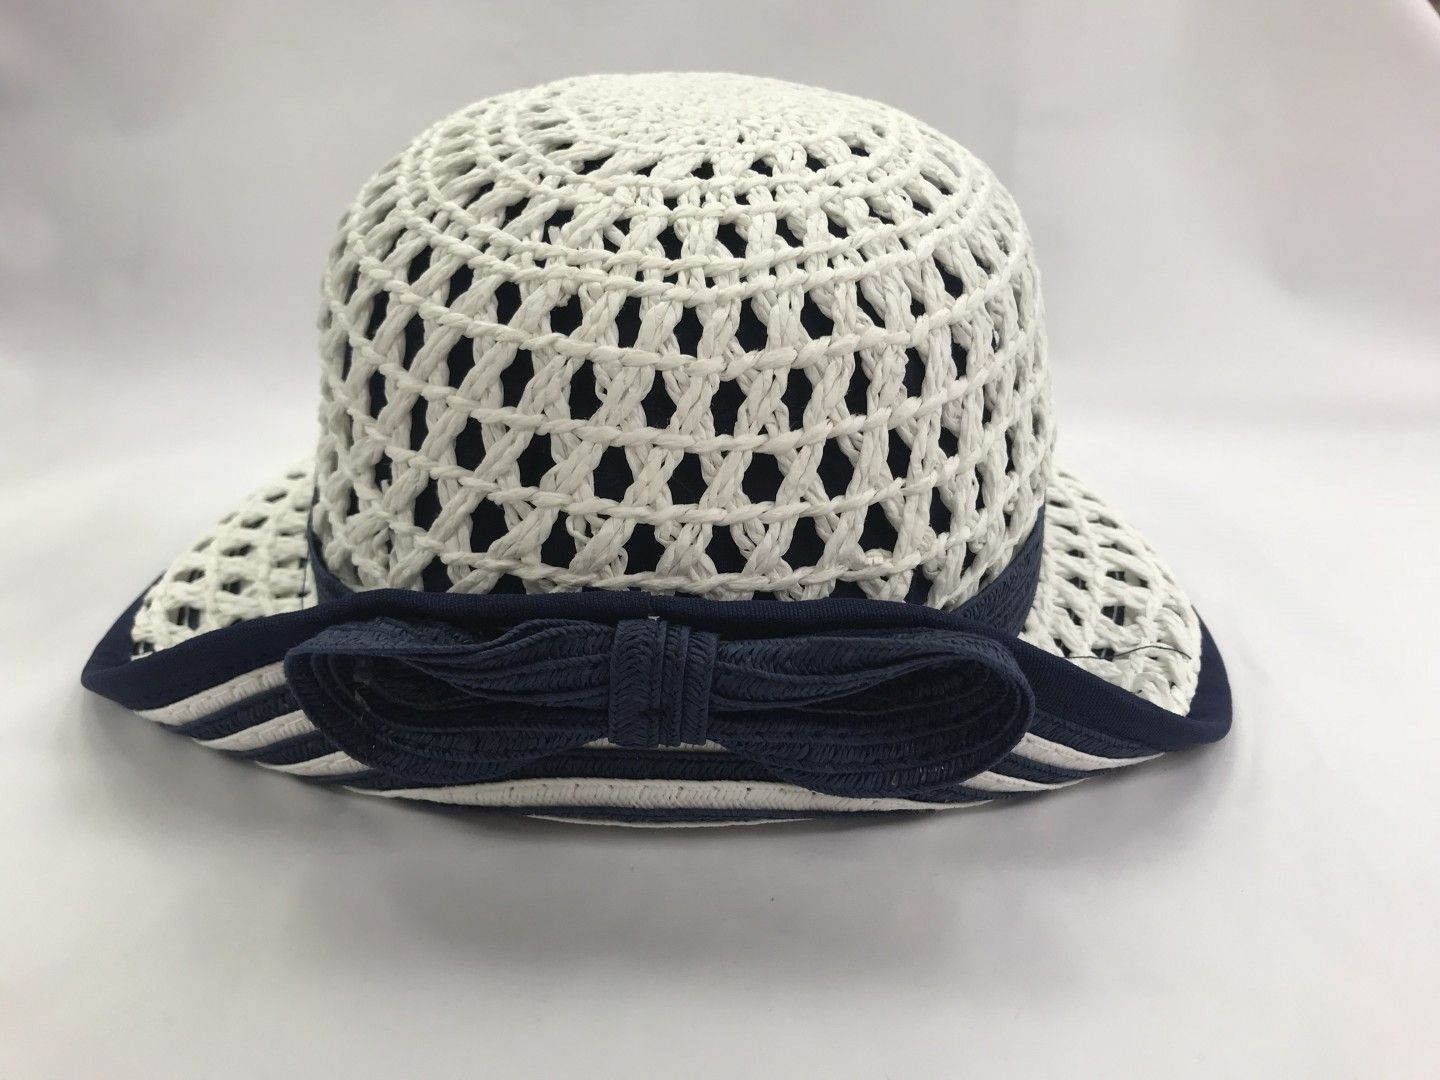 MAYORAL NAVY AND WHITE WOVEN HAT SIZES SMALL-LARGE